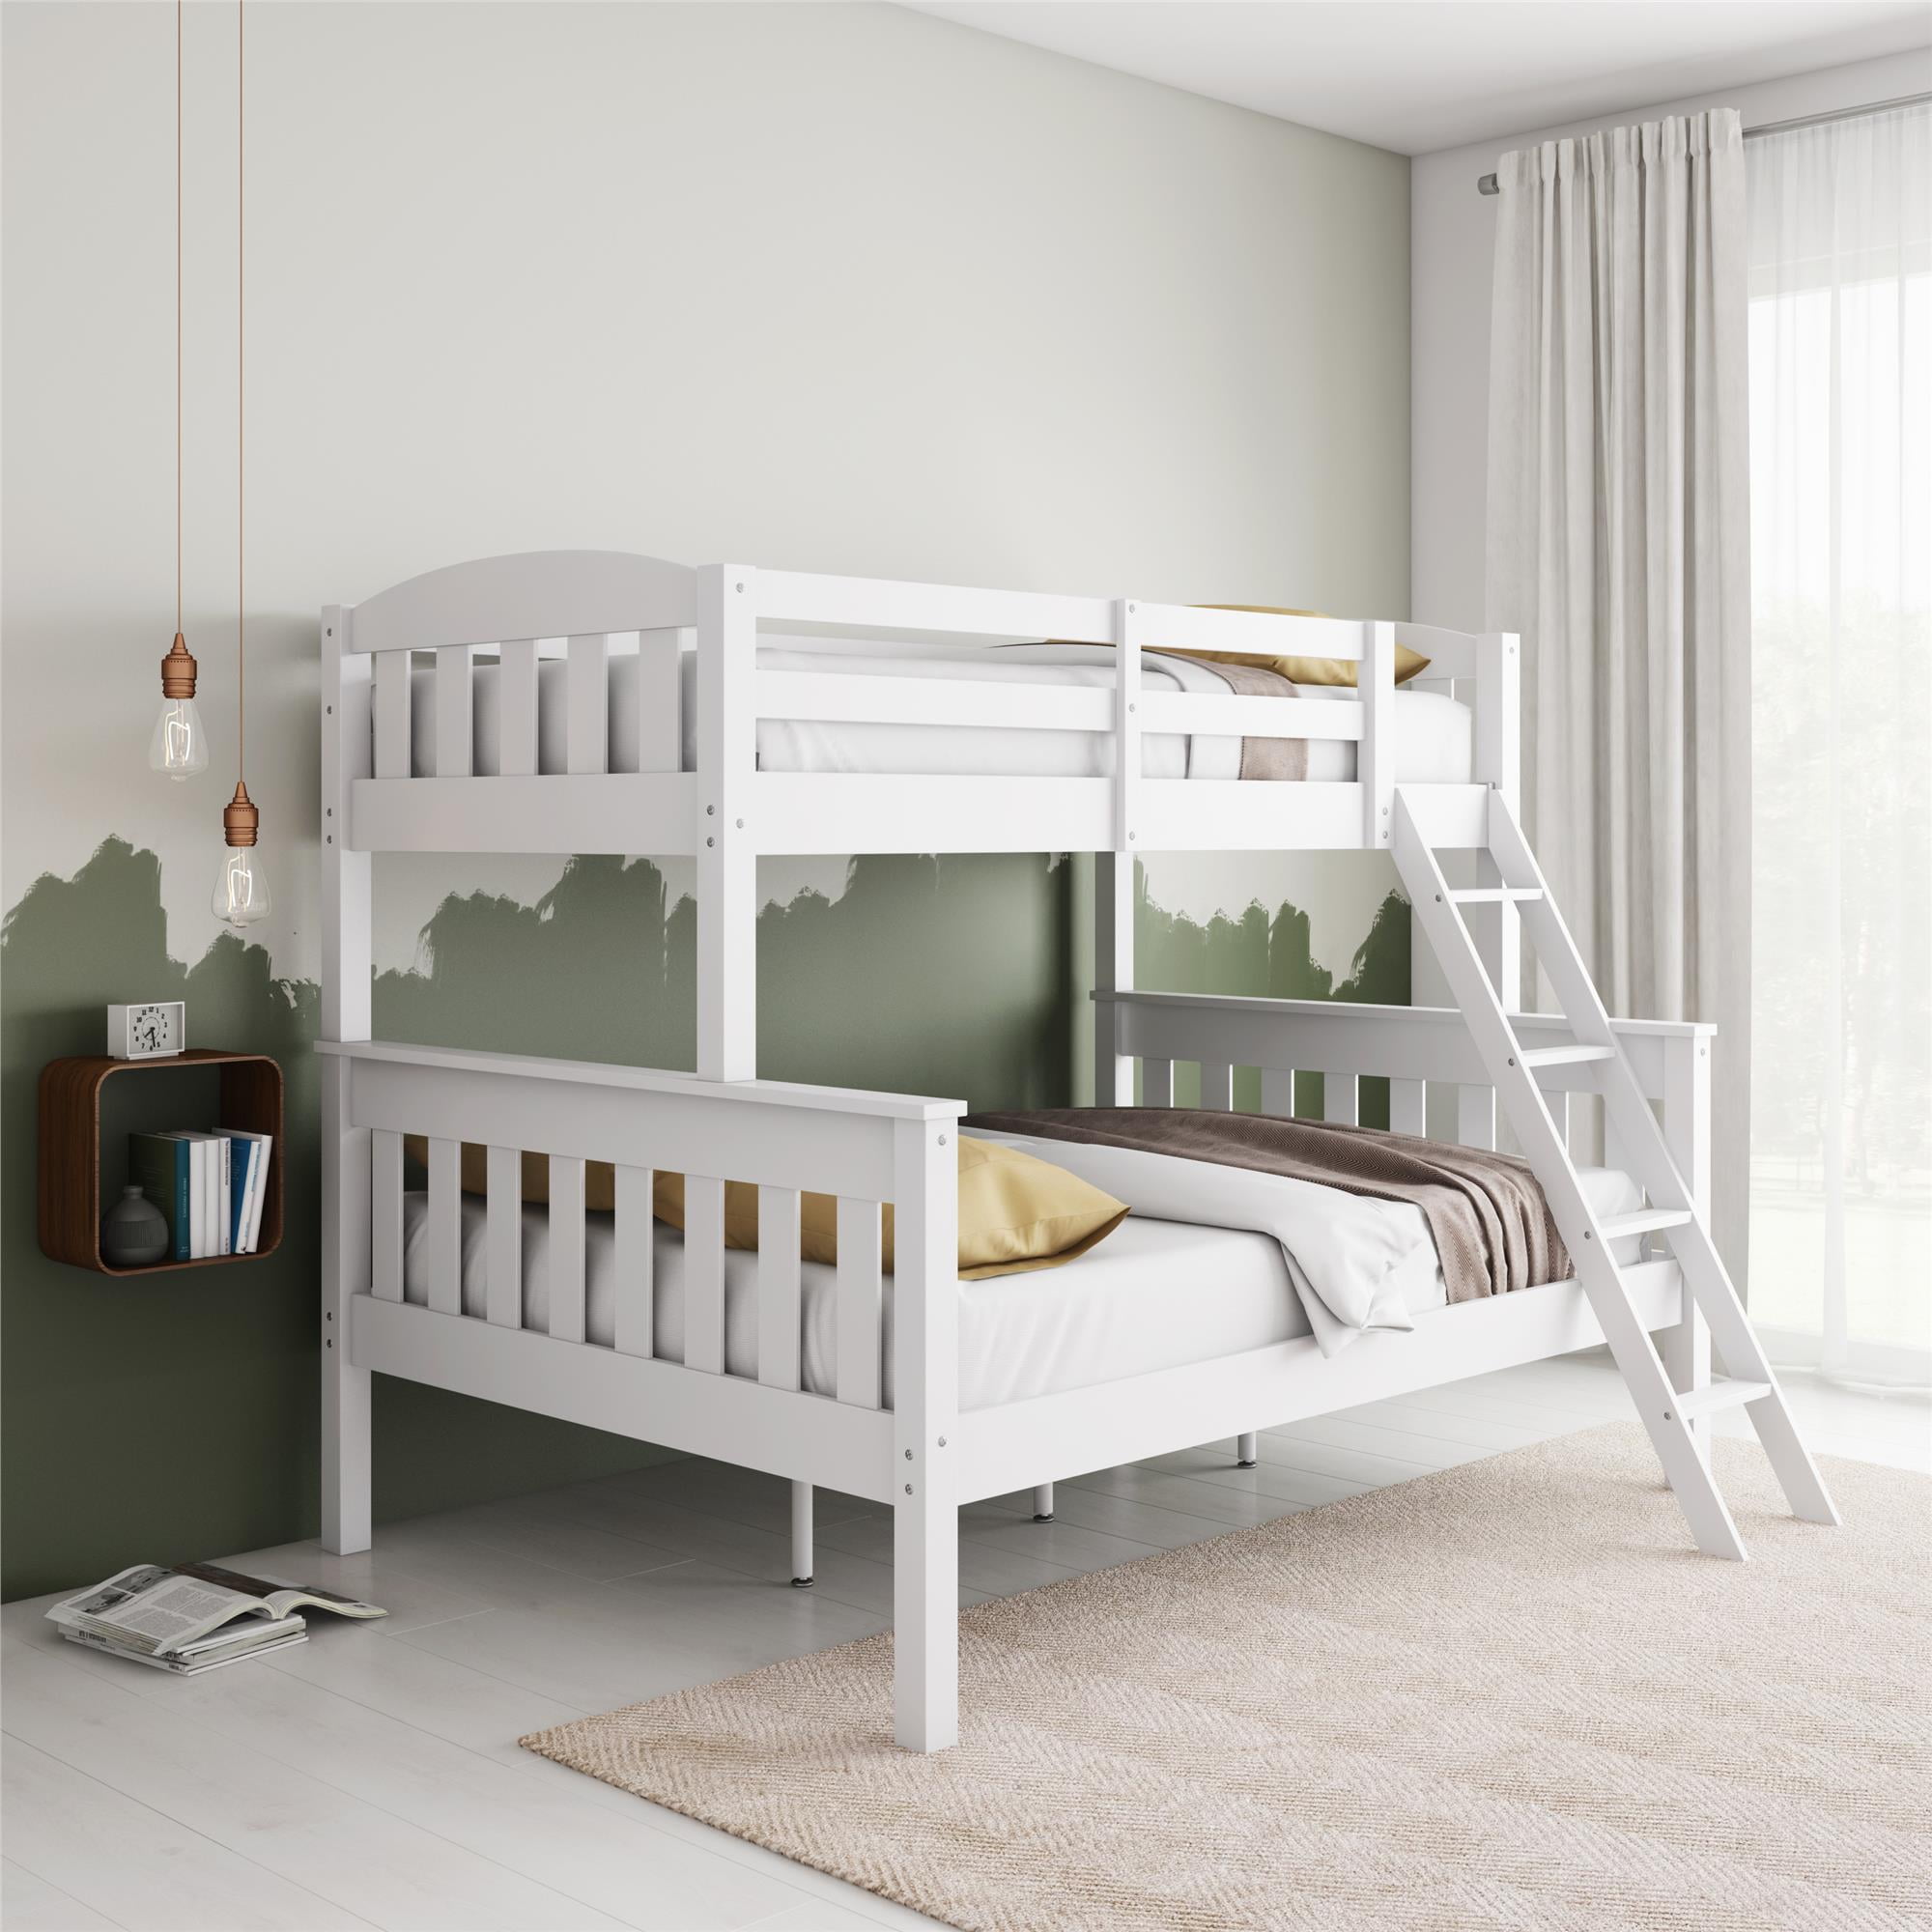 Airlie Twin Over Full Bunk Bed White, White Wood Bunk Beds Twin Over Full